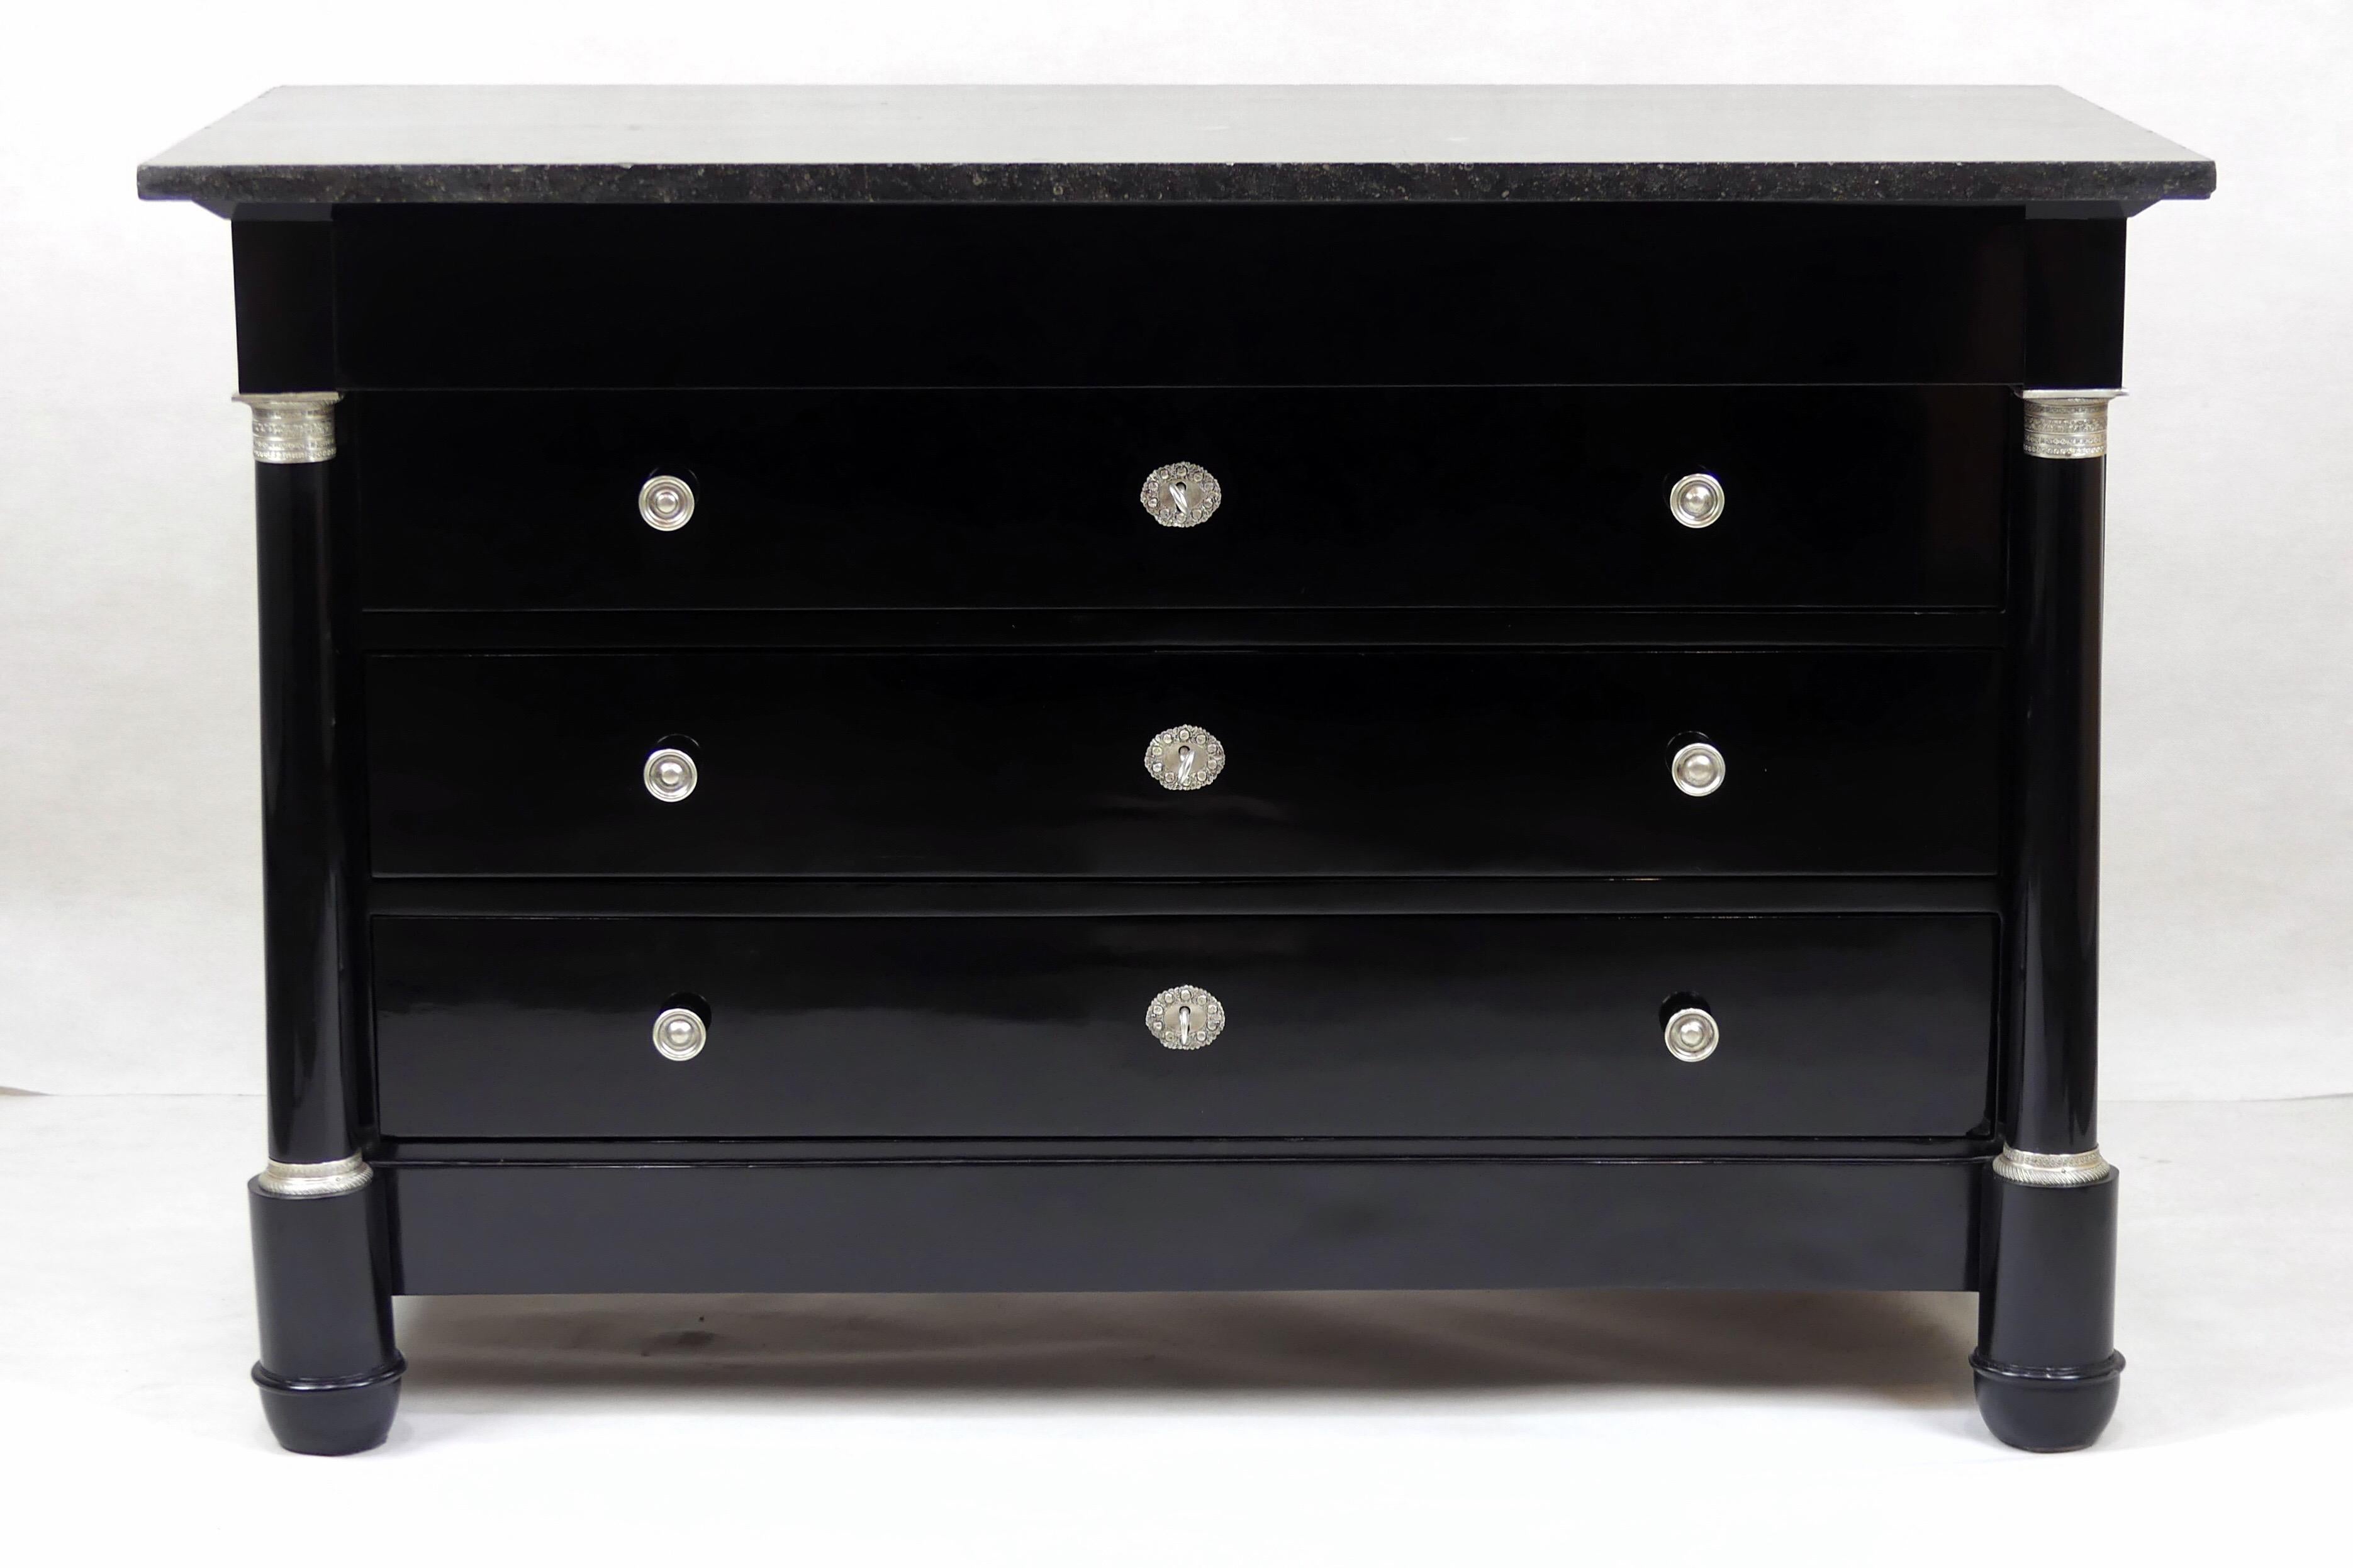 French Antique Black Ebonized Silver Empire Chest of Drawers from France, 19th Century For Sale